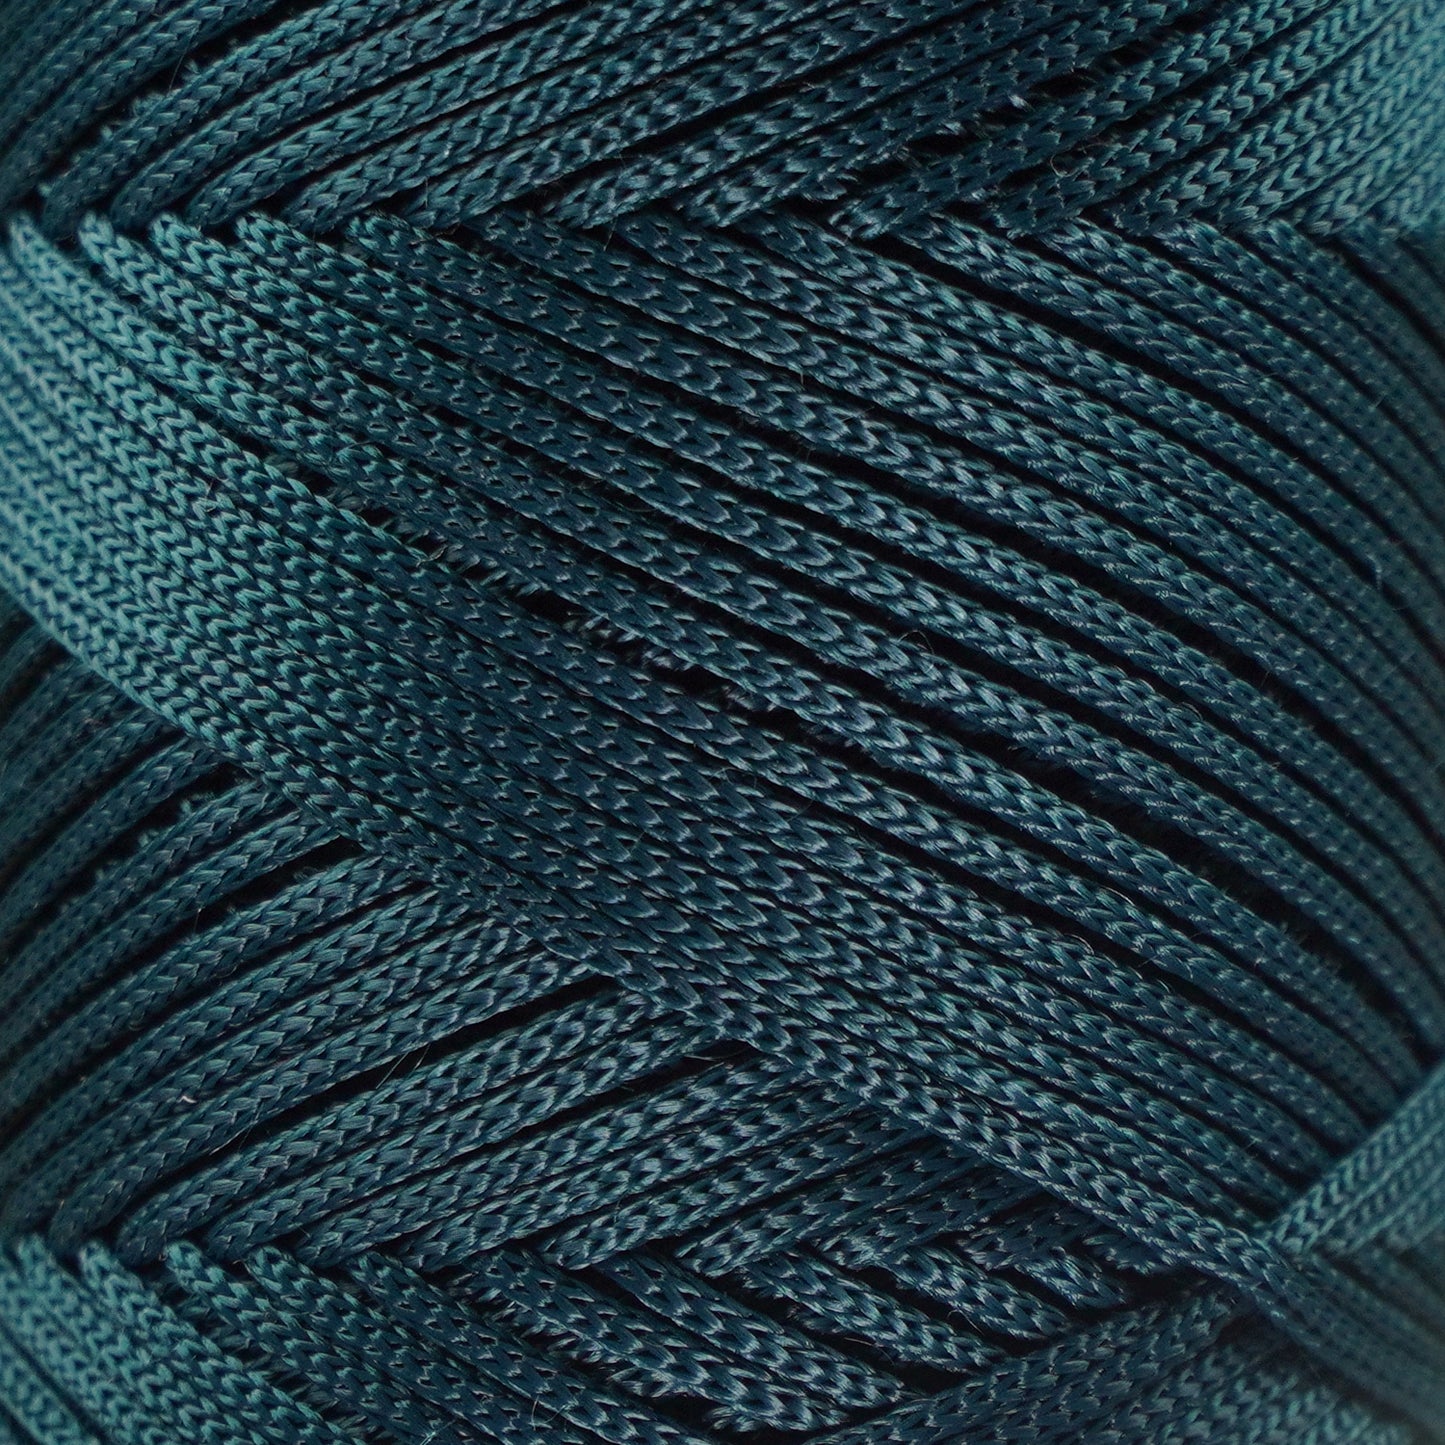 Polyester Macrame Cord 2mm x 250 yards (750 feet)  - Forest Green